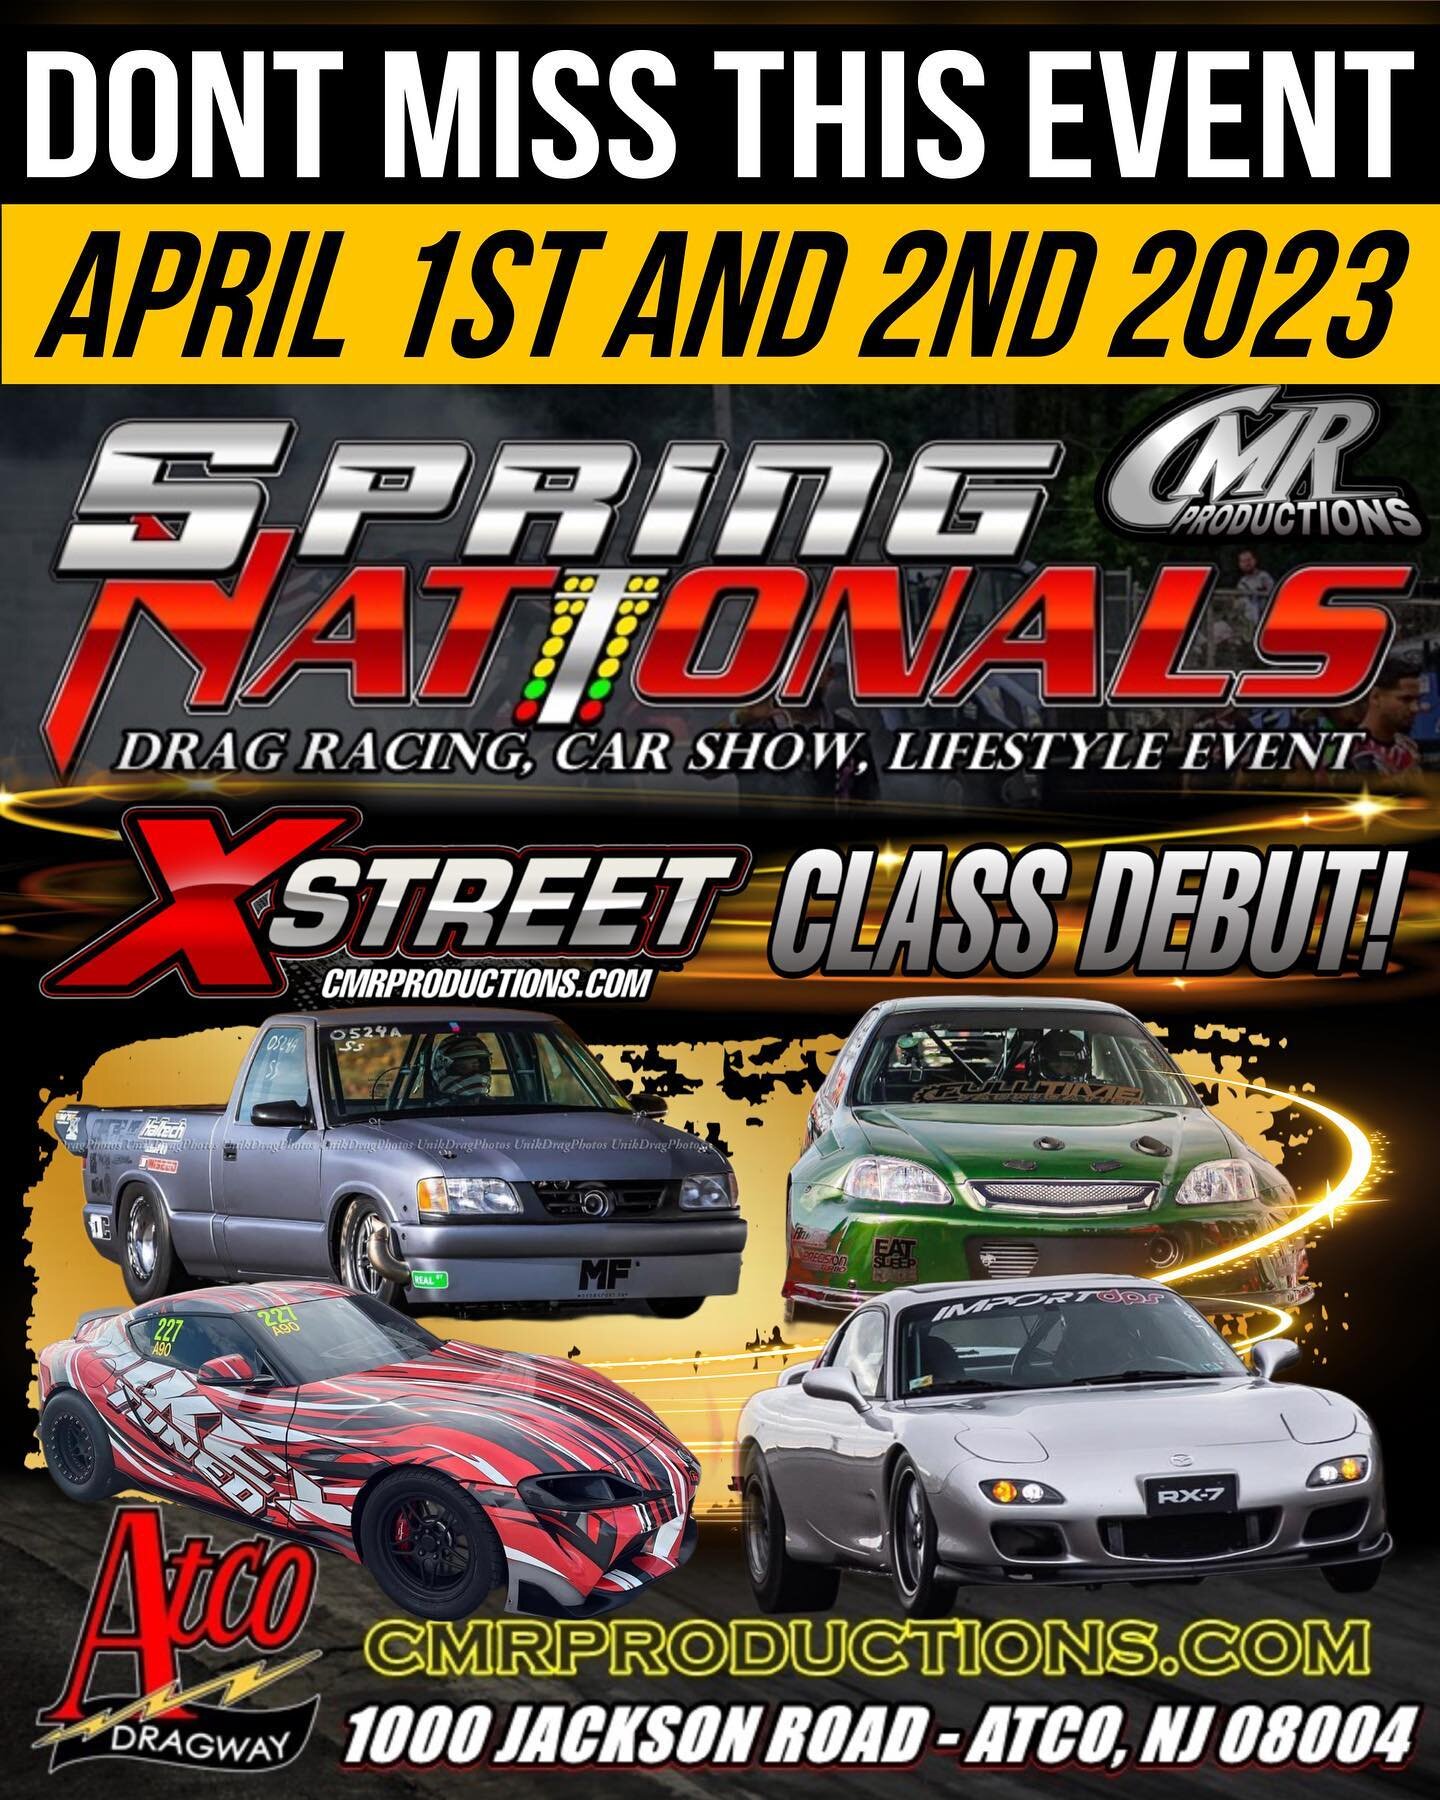 🔥The X-Street class debuts at Spring Nationals! 🔥
We are super excited to get this 2023 season going: Spring Nationals, Import Revival and Fall Nationals are all points championship races! 

This class previously titled &ldquo;XFWD&rdquo; now offer